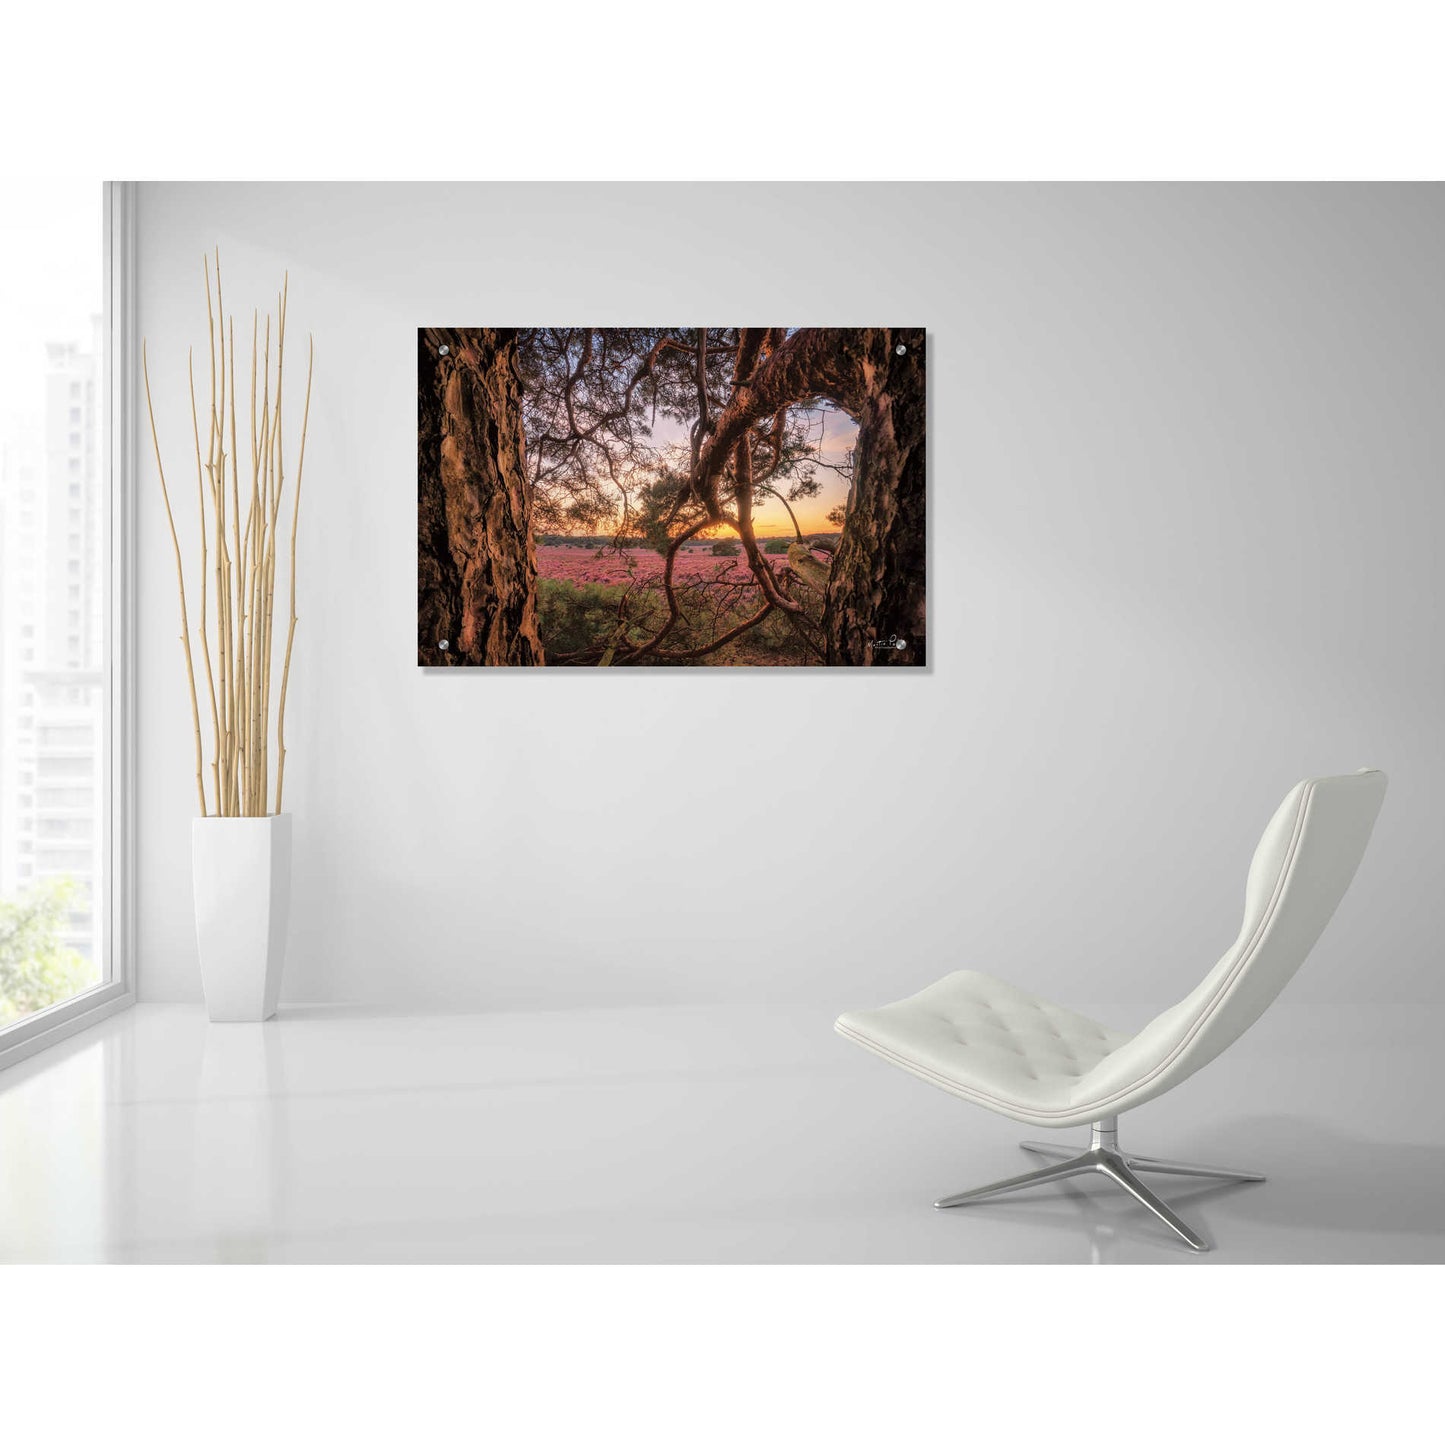 Epic Art 'In Between' by Martin Podt, Acrylic Glass Wall Art,36x24